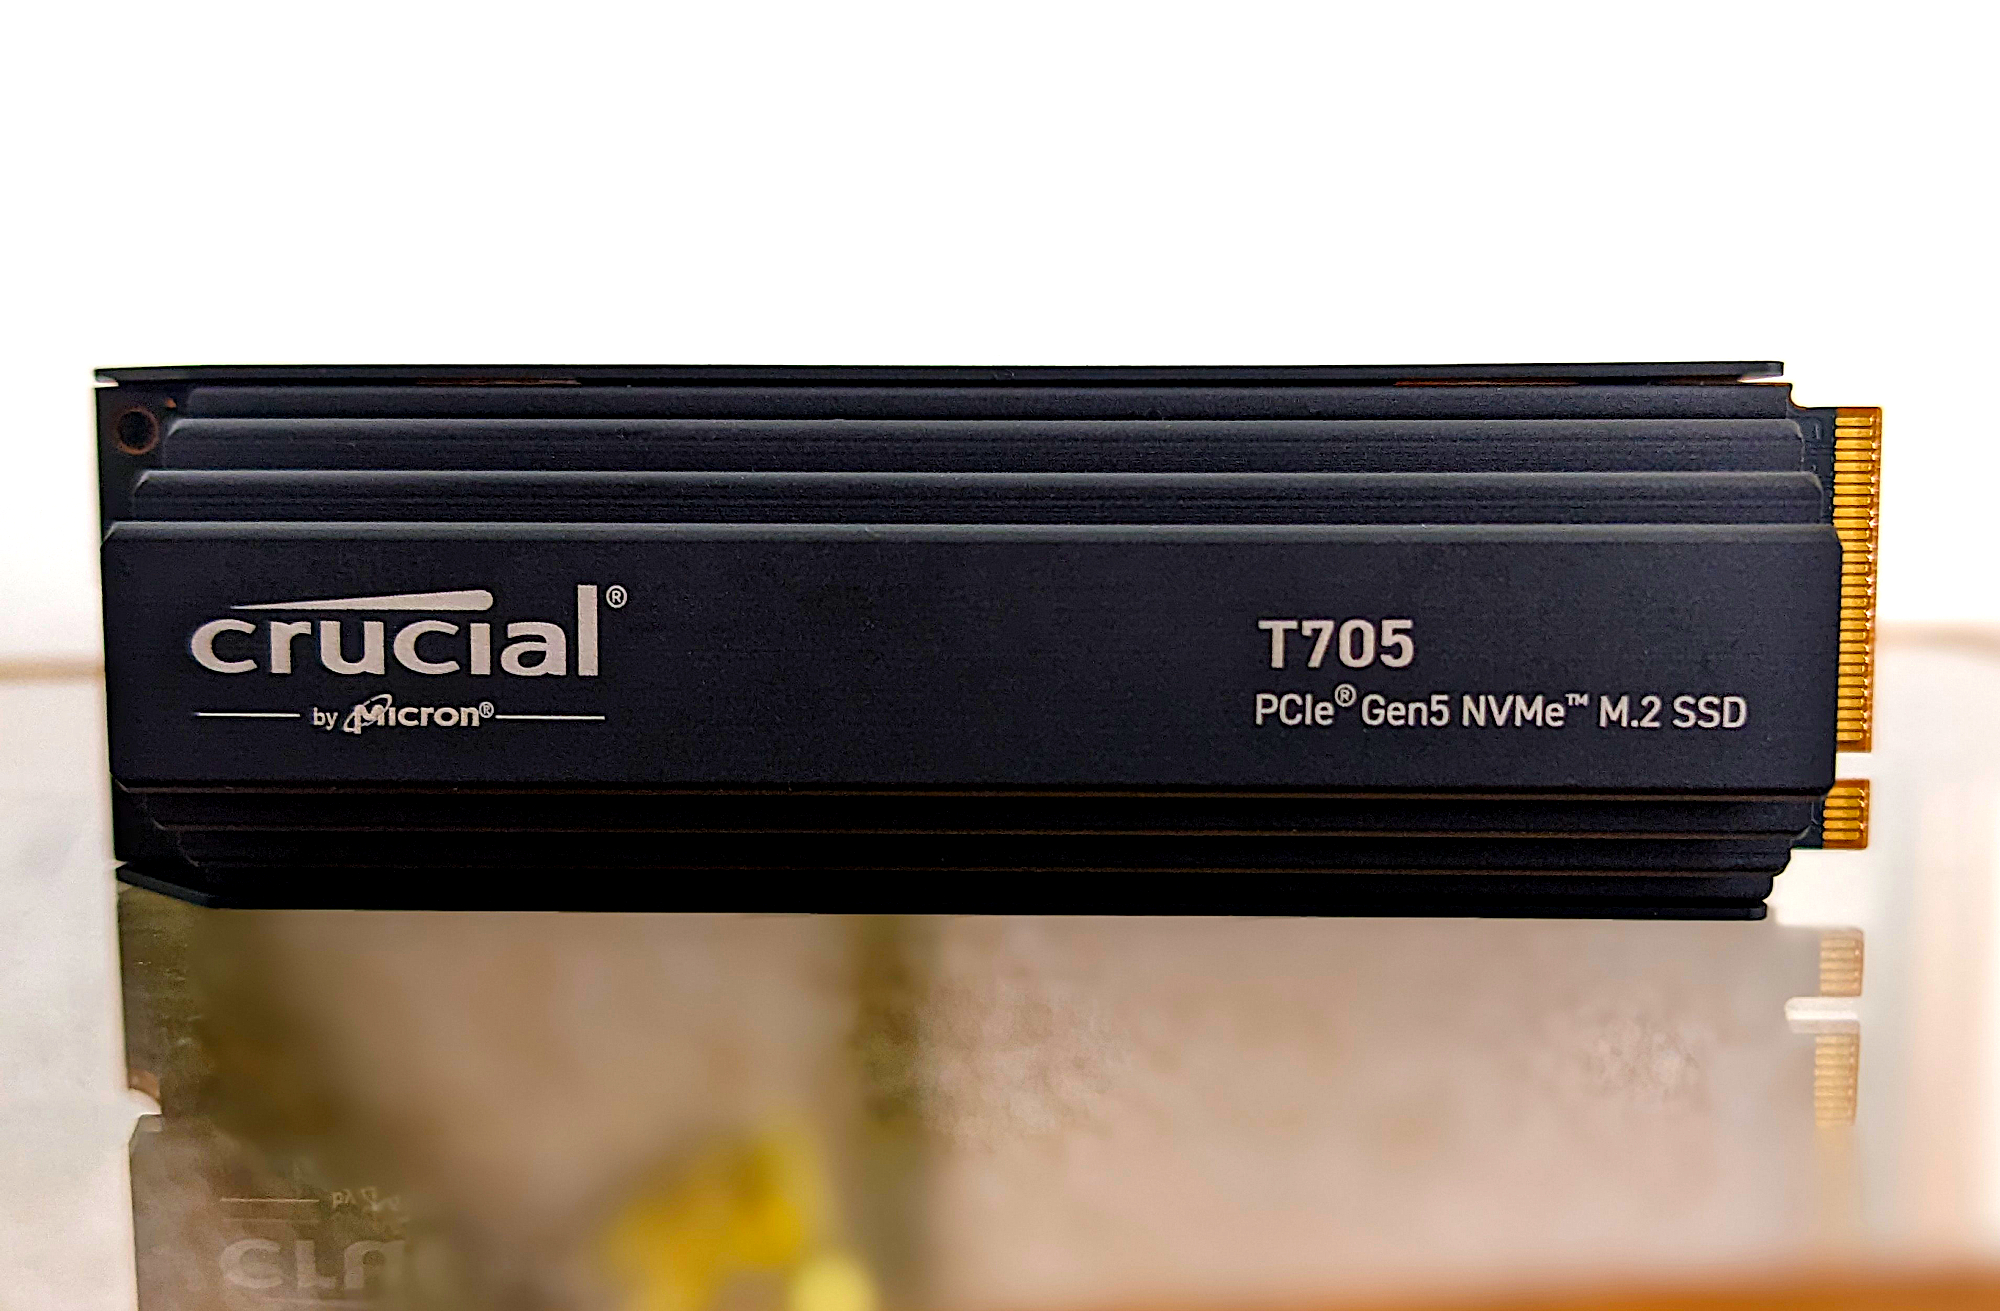 Crucial T705 NVMe SSD - Best PCIe 5.0 SSD